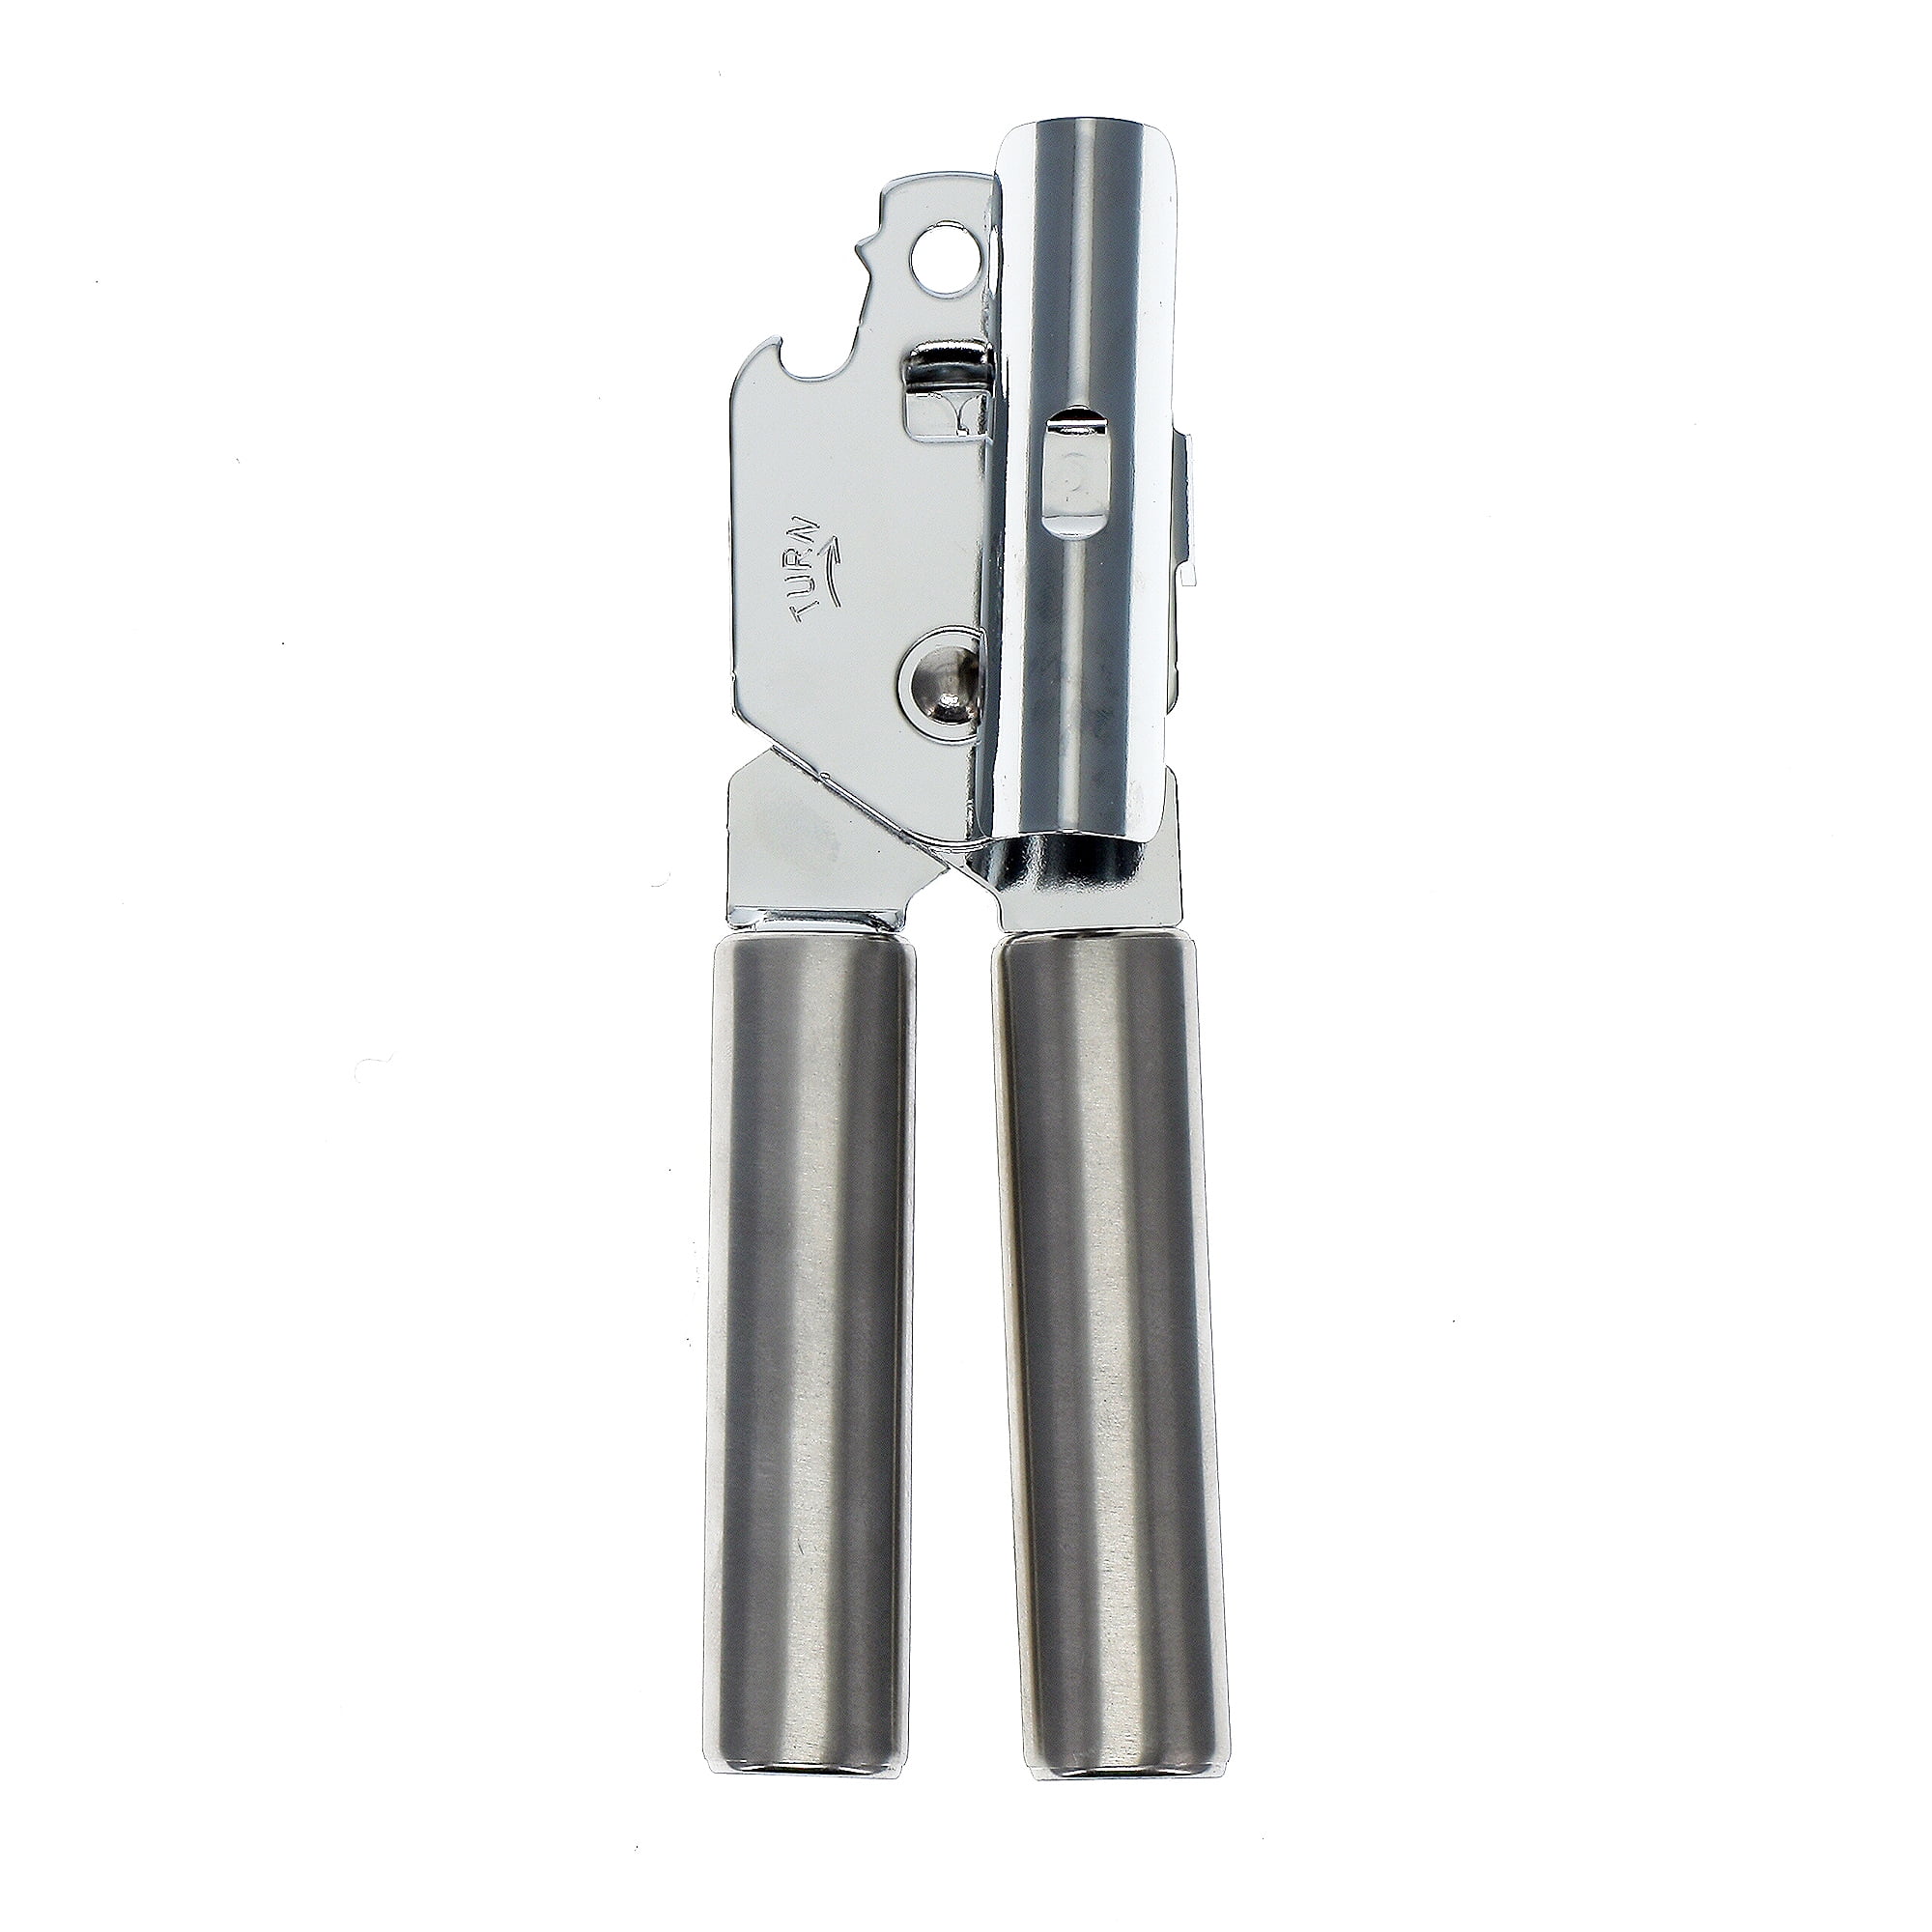 Mainstays Stainless Steel Gear Can Opener